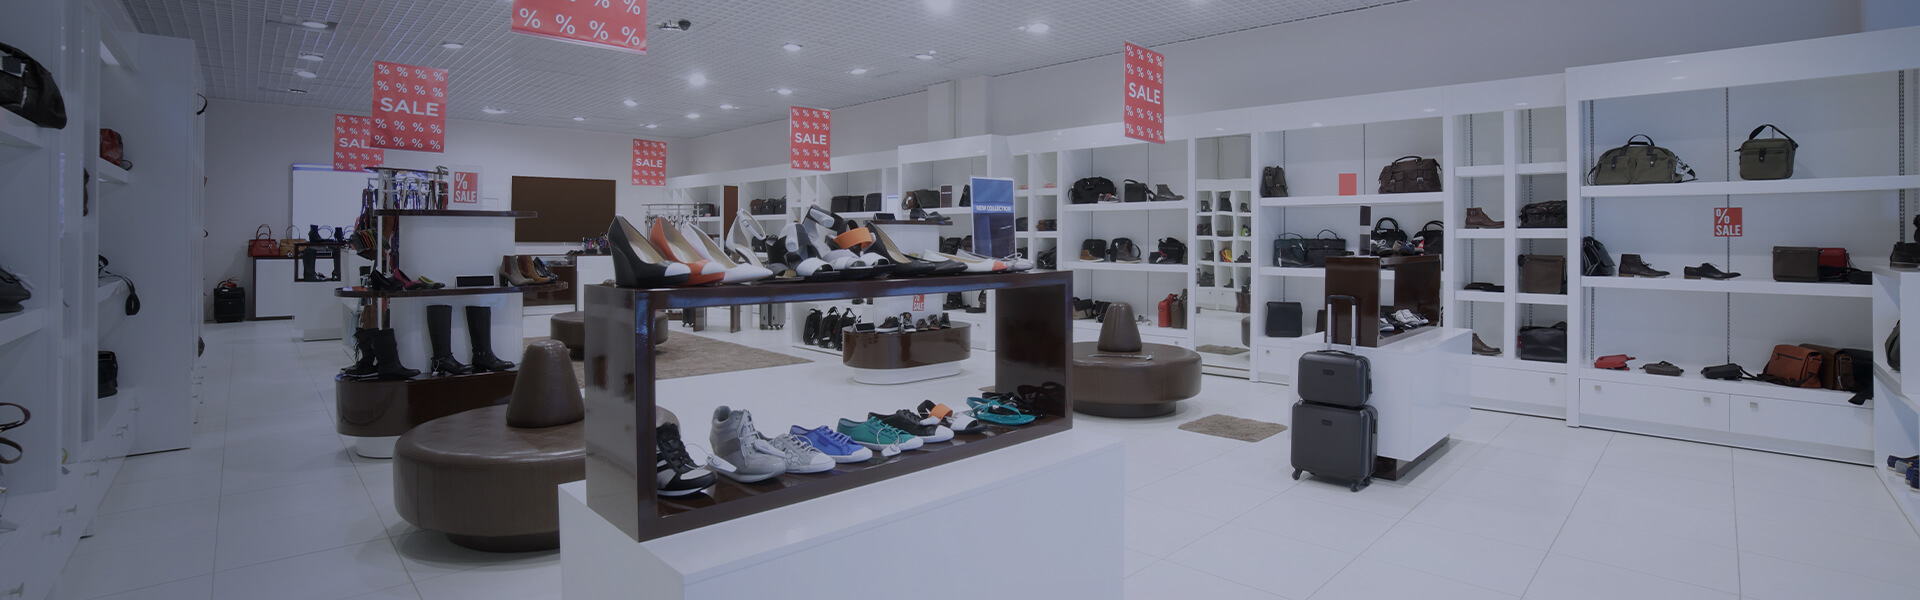 Image of the interior of a shoe retailer